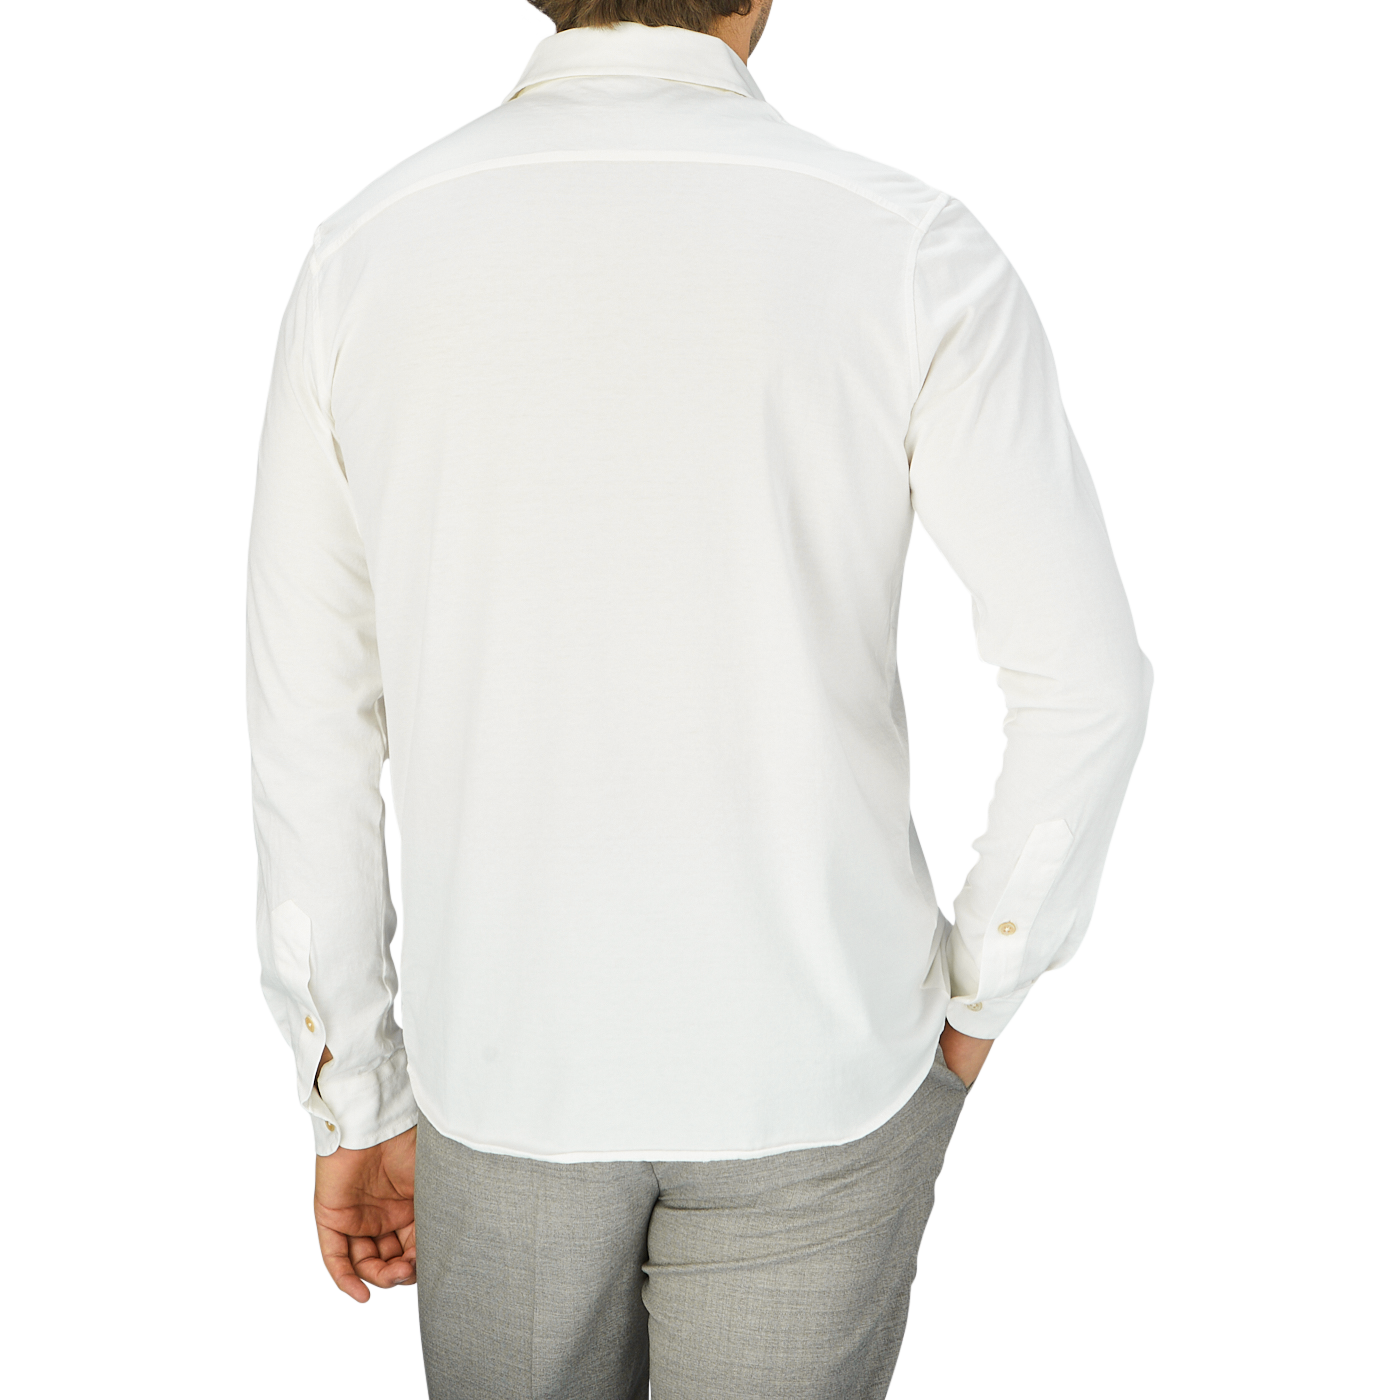 The back view of a man wearing a slim fit, Off White Cotton Jersey Knitted Shirt by Filippo de Laurentiis.